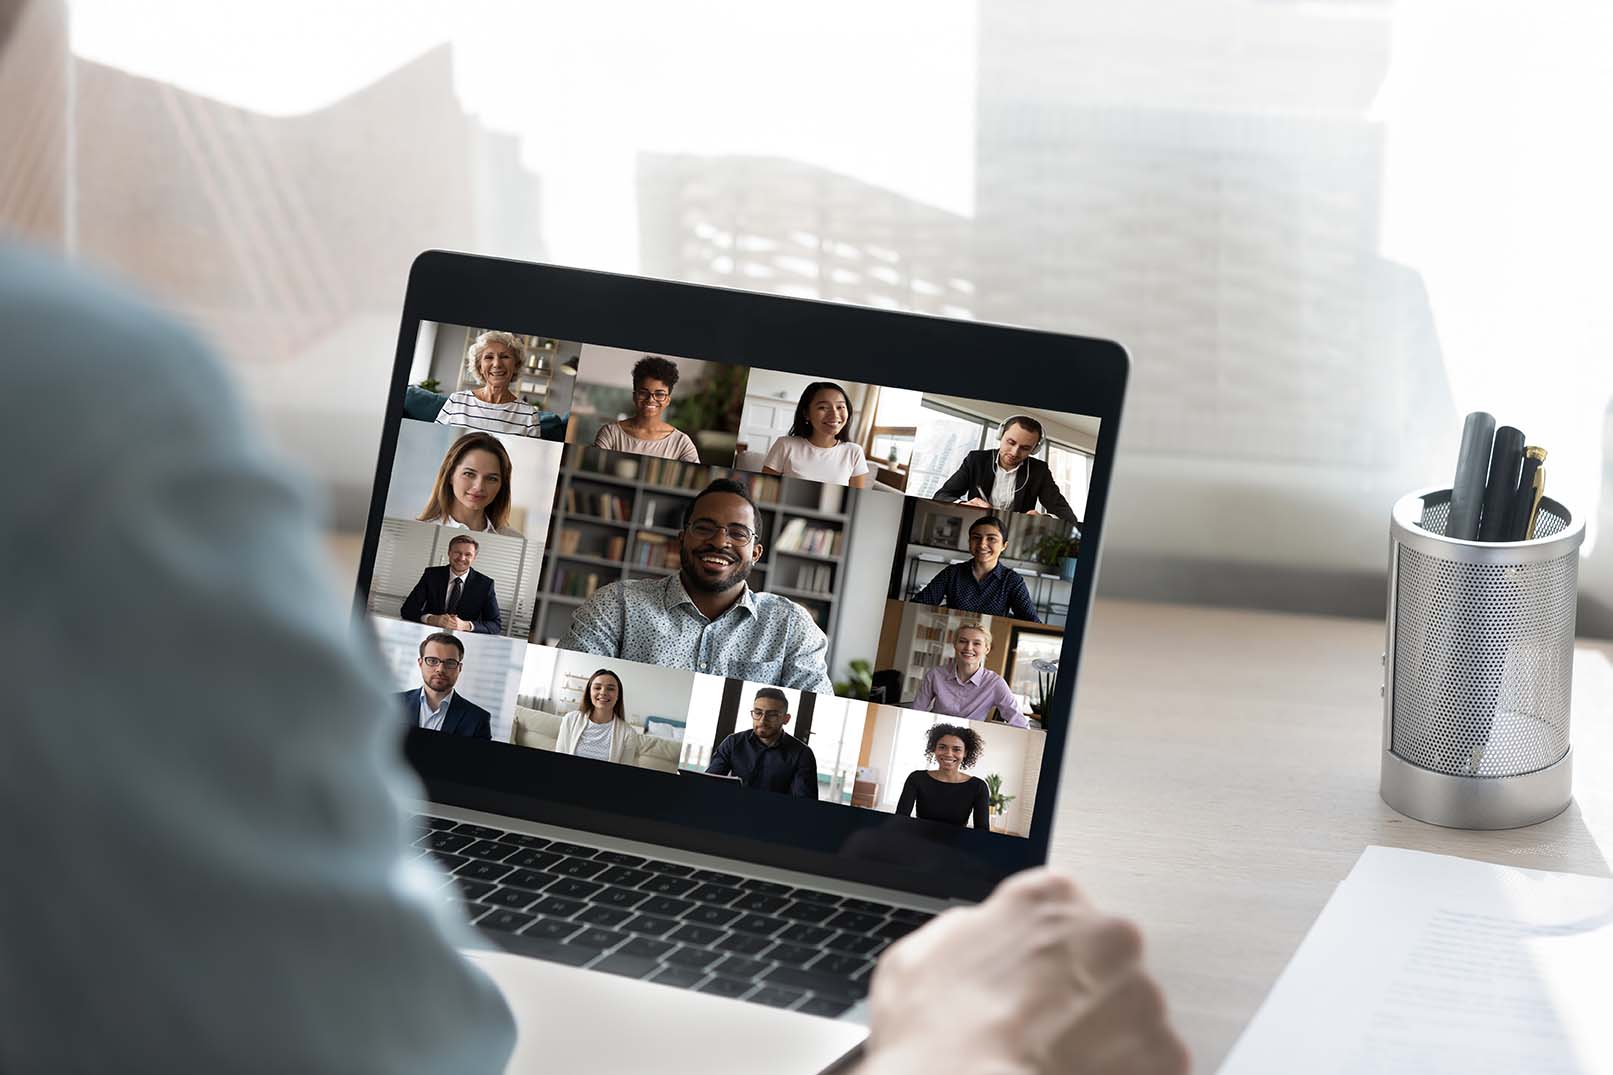 Online conference with multiple people